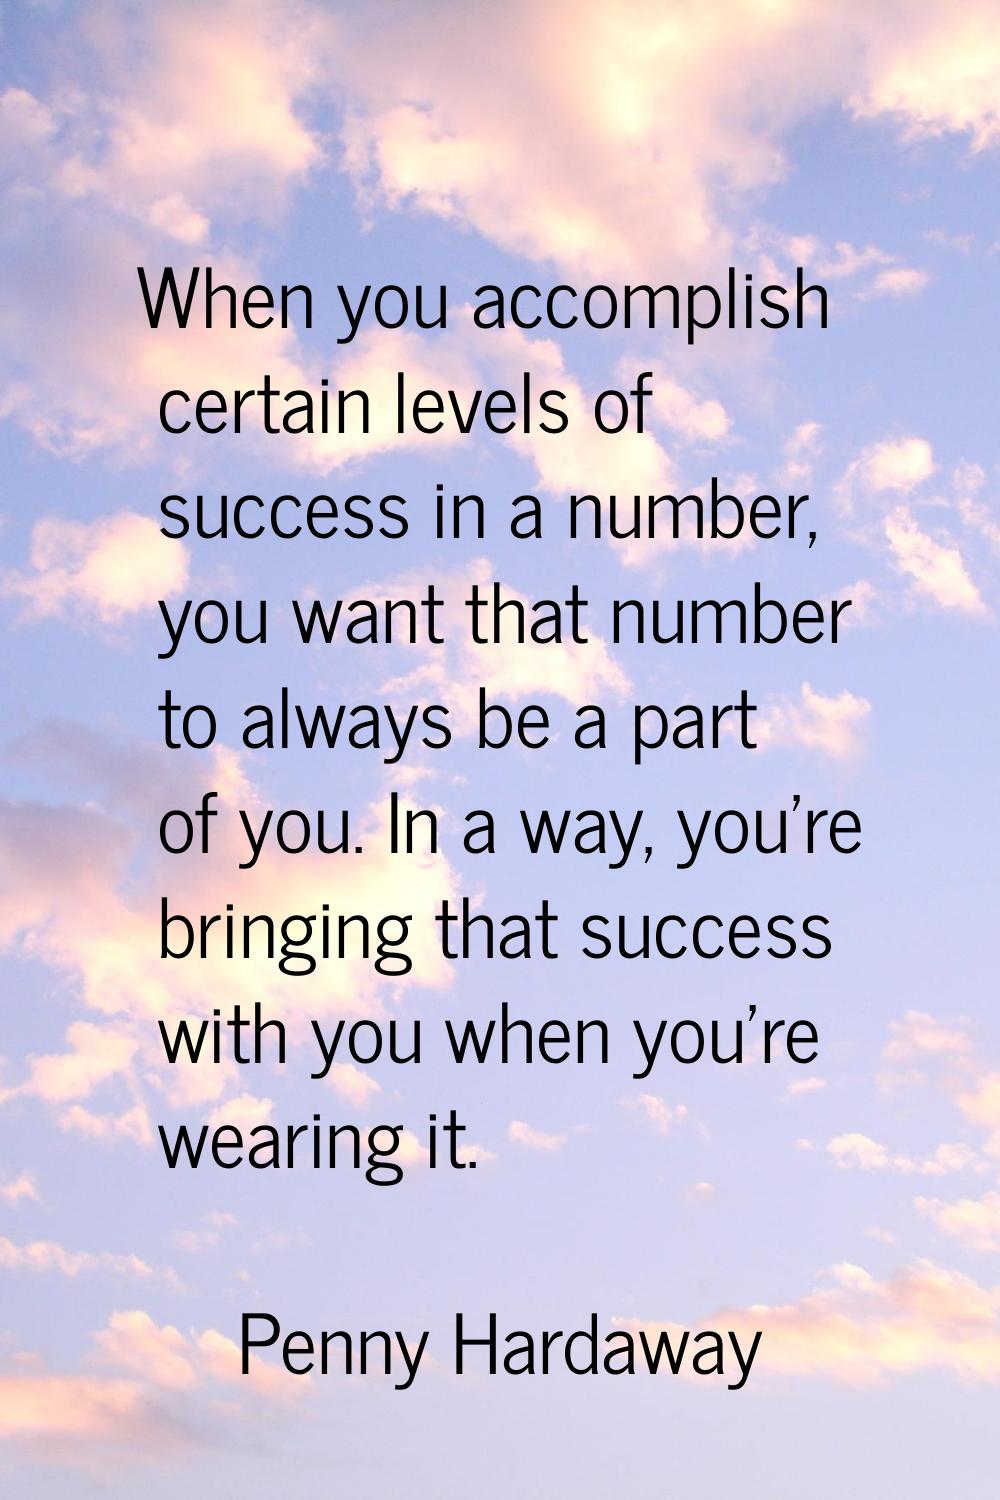 When you accomplish certain levels of success in a number, you want that number to always be a part